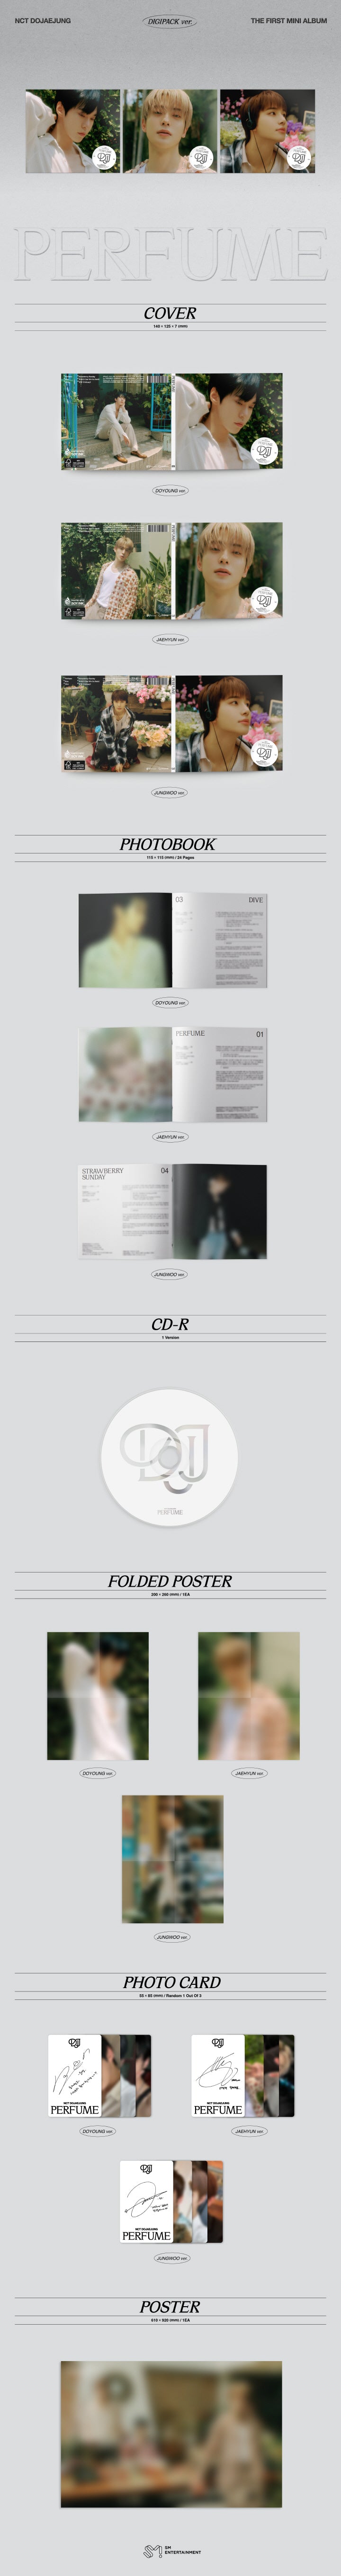 1 CD
1 Photo Book (24 pages)
1 Folded Poster
1 Photo Card (random out of 3 types)